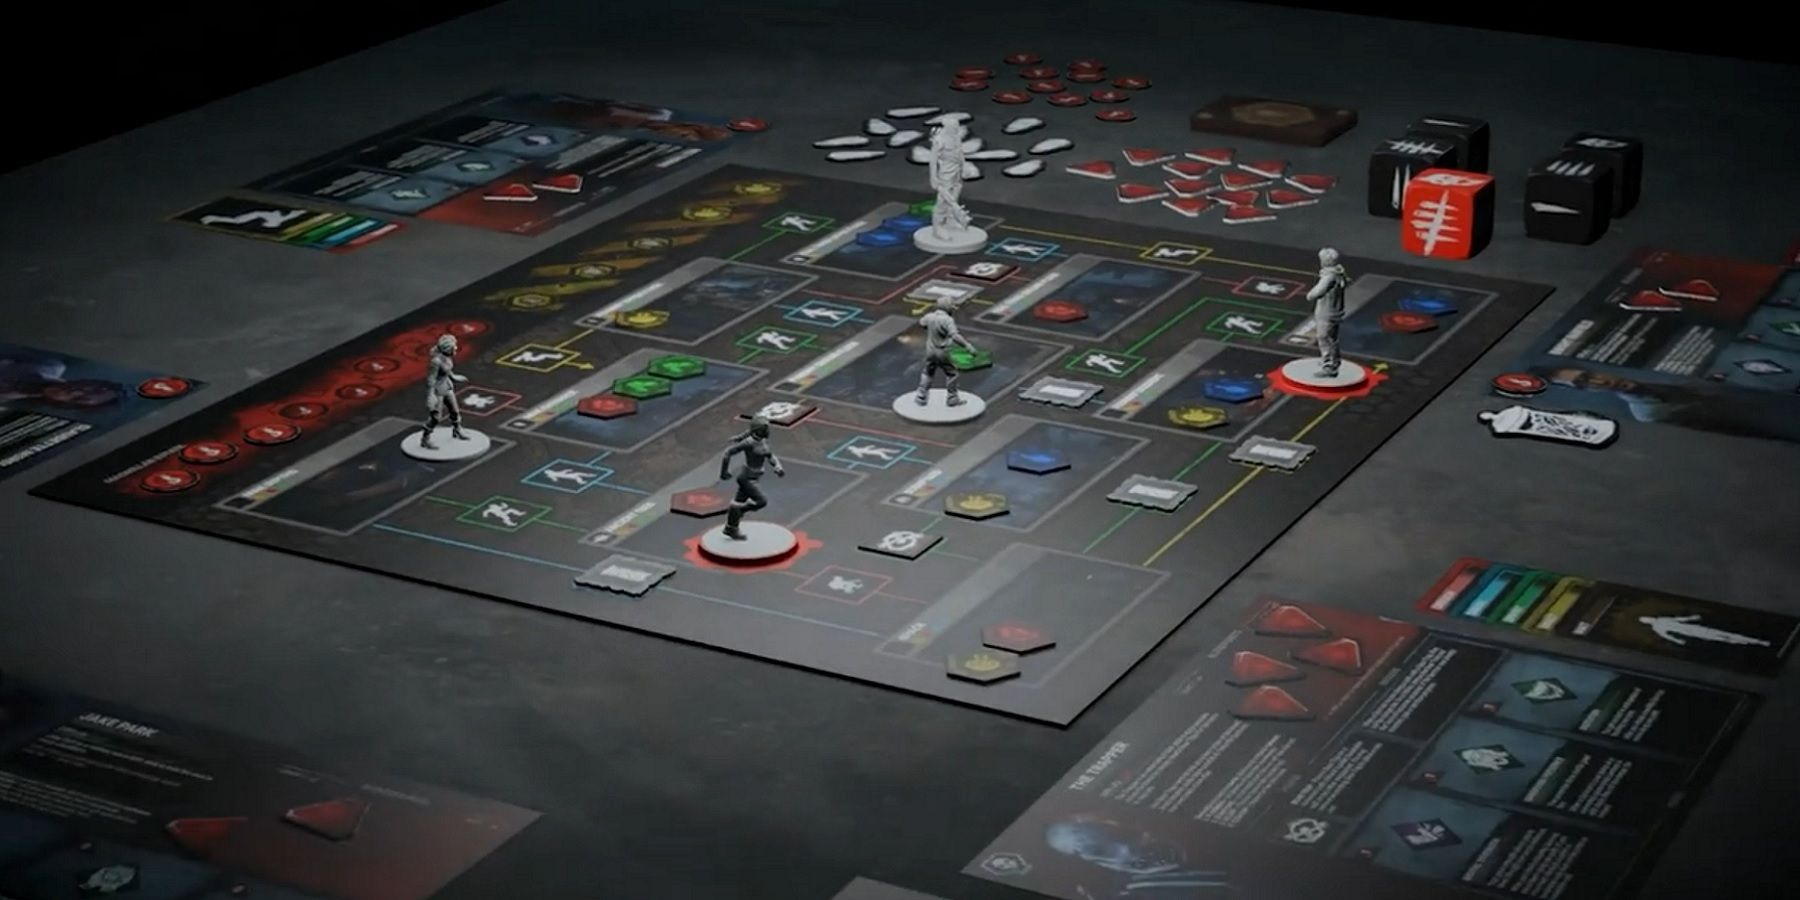 Image from the upcoming Dead by Daylight board game showing the board itself.